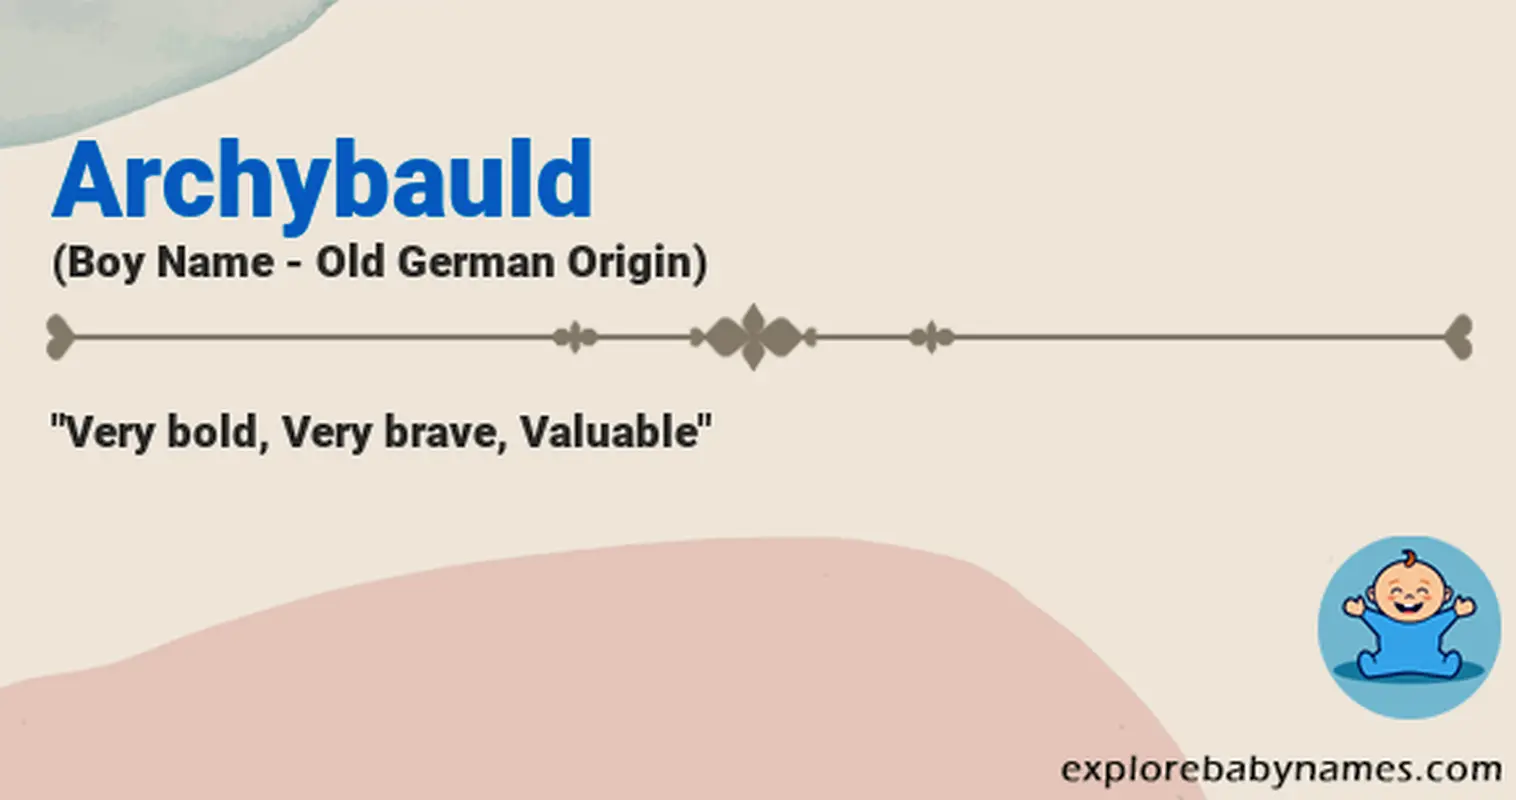 Meaning of Archybauld